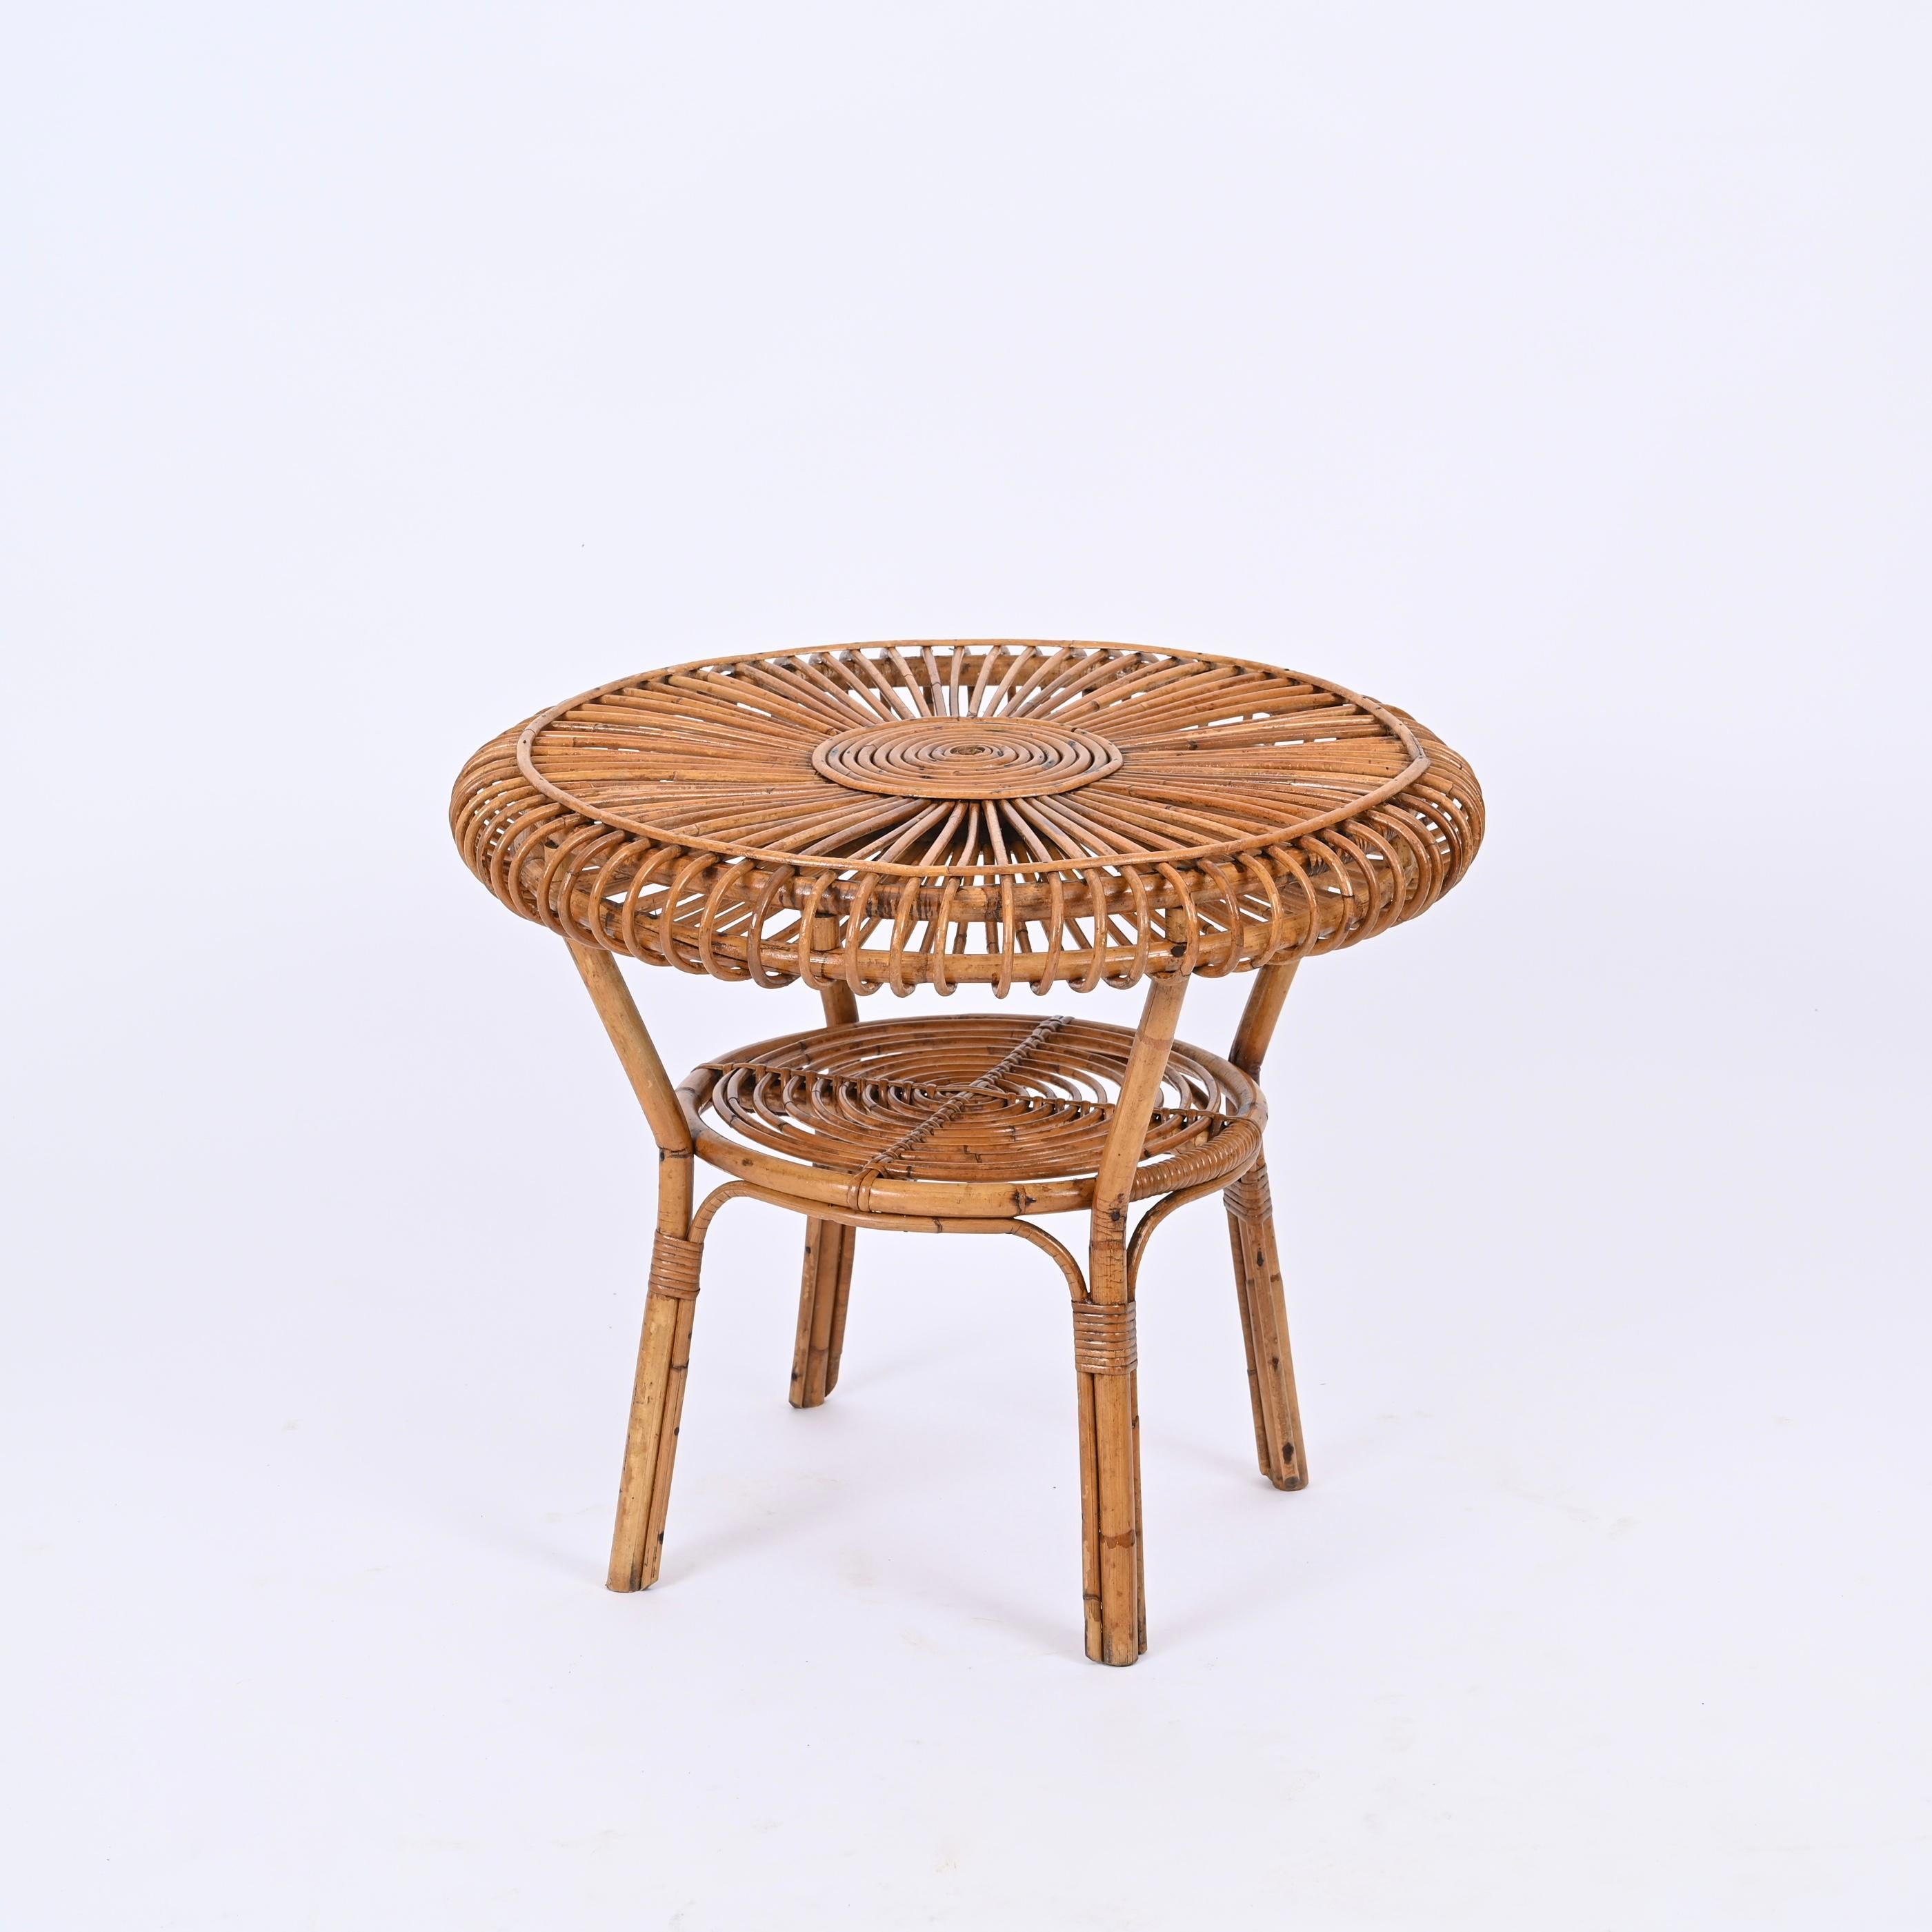 MidCentury Italian Round Coffee Table in Rattan and Bamboo, Italy 1960s For Sale 3